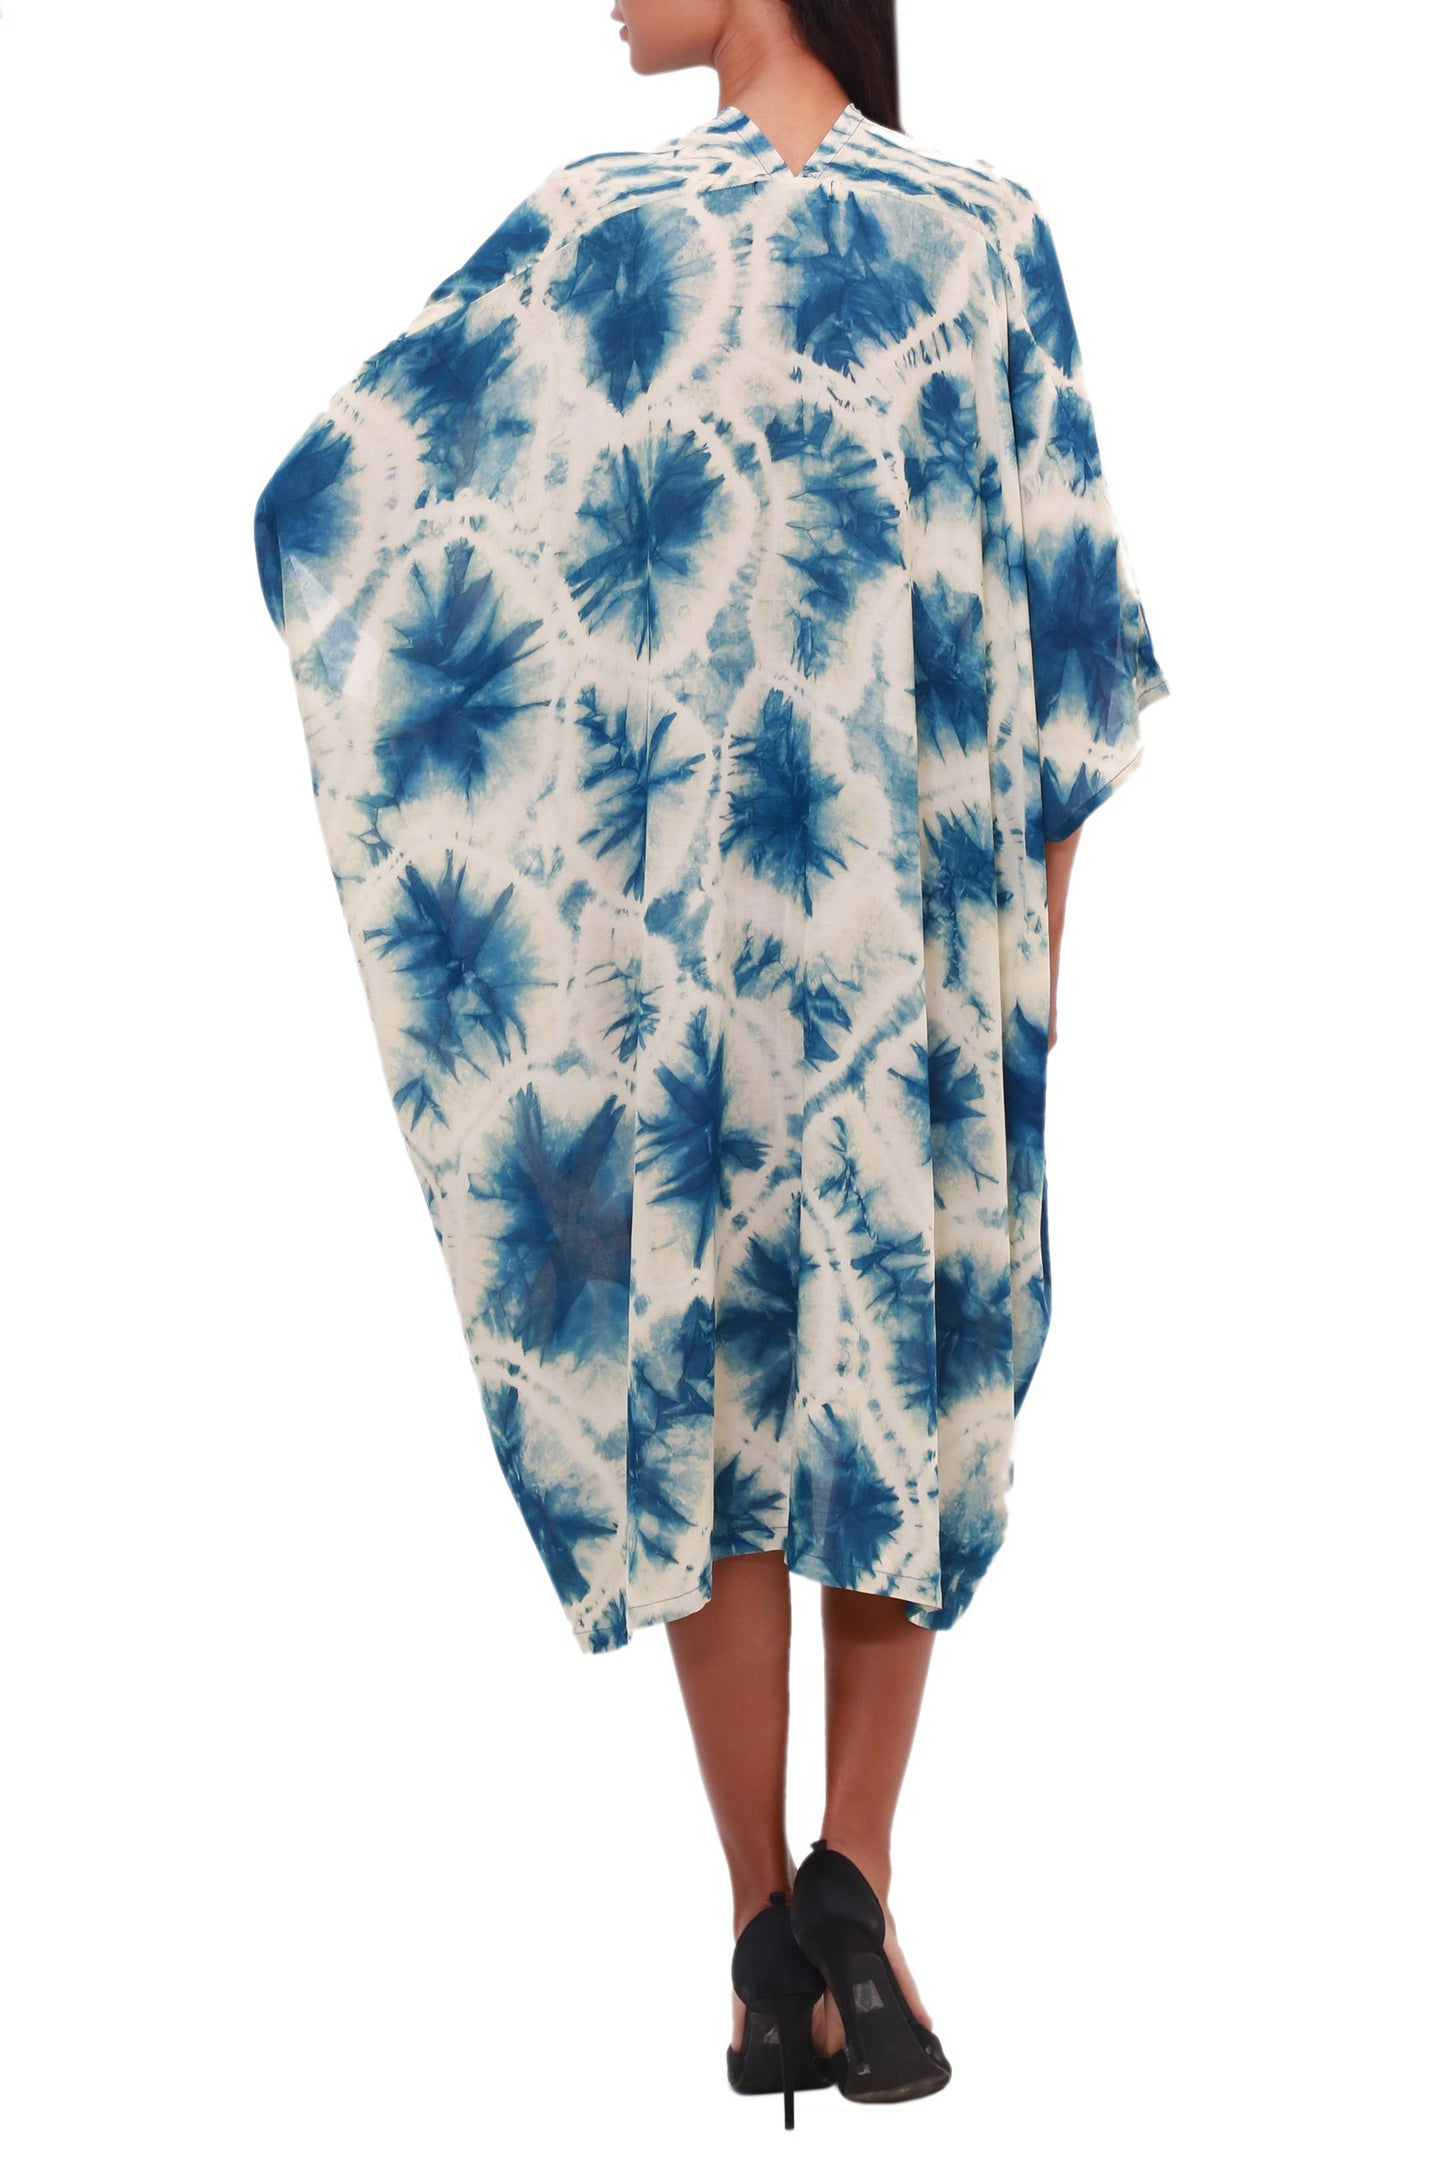 Angin Segara Oceanic Tie-Dyed Rayon Caftan Crafted in Java